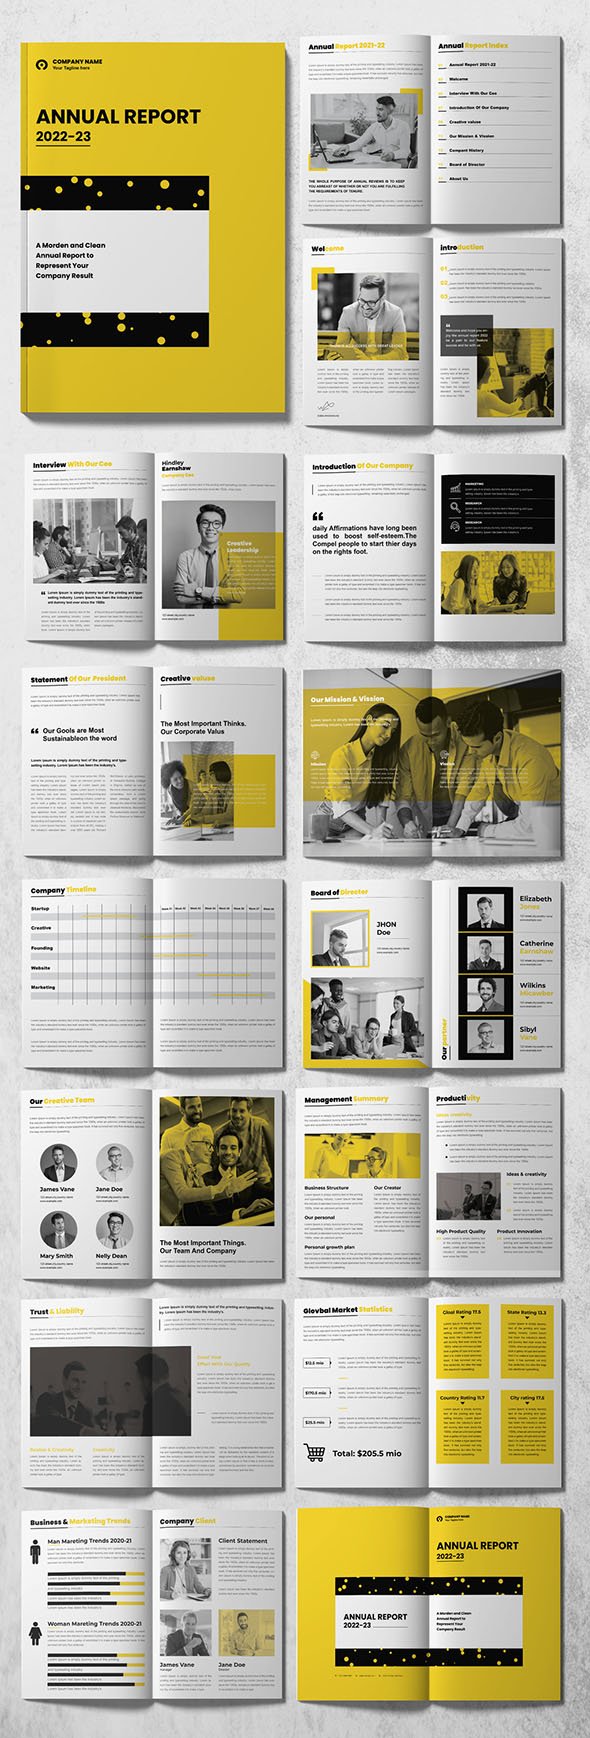 AdobeStock - Annual Report Brochure Layout with Yellow Accents - 513056248